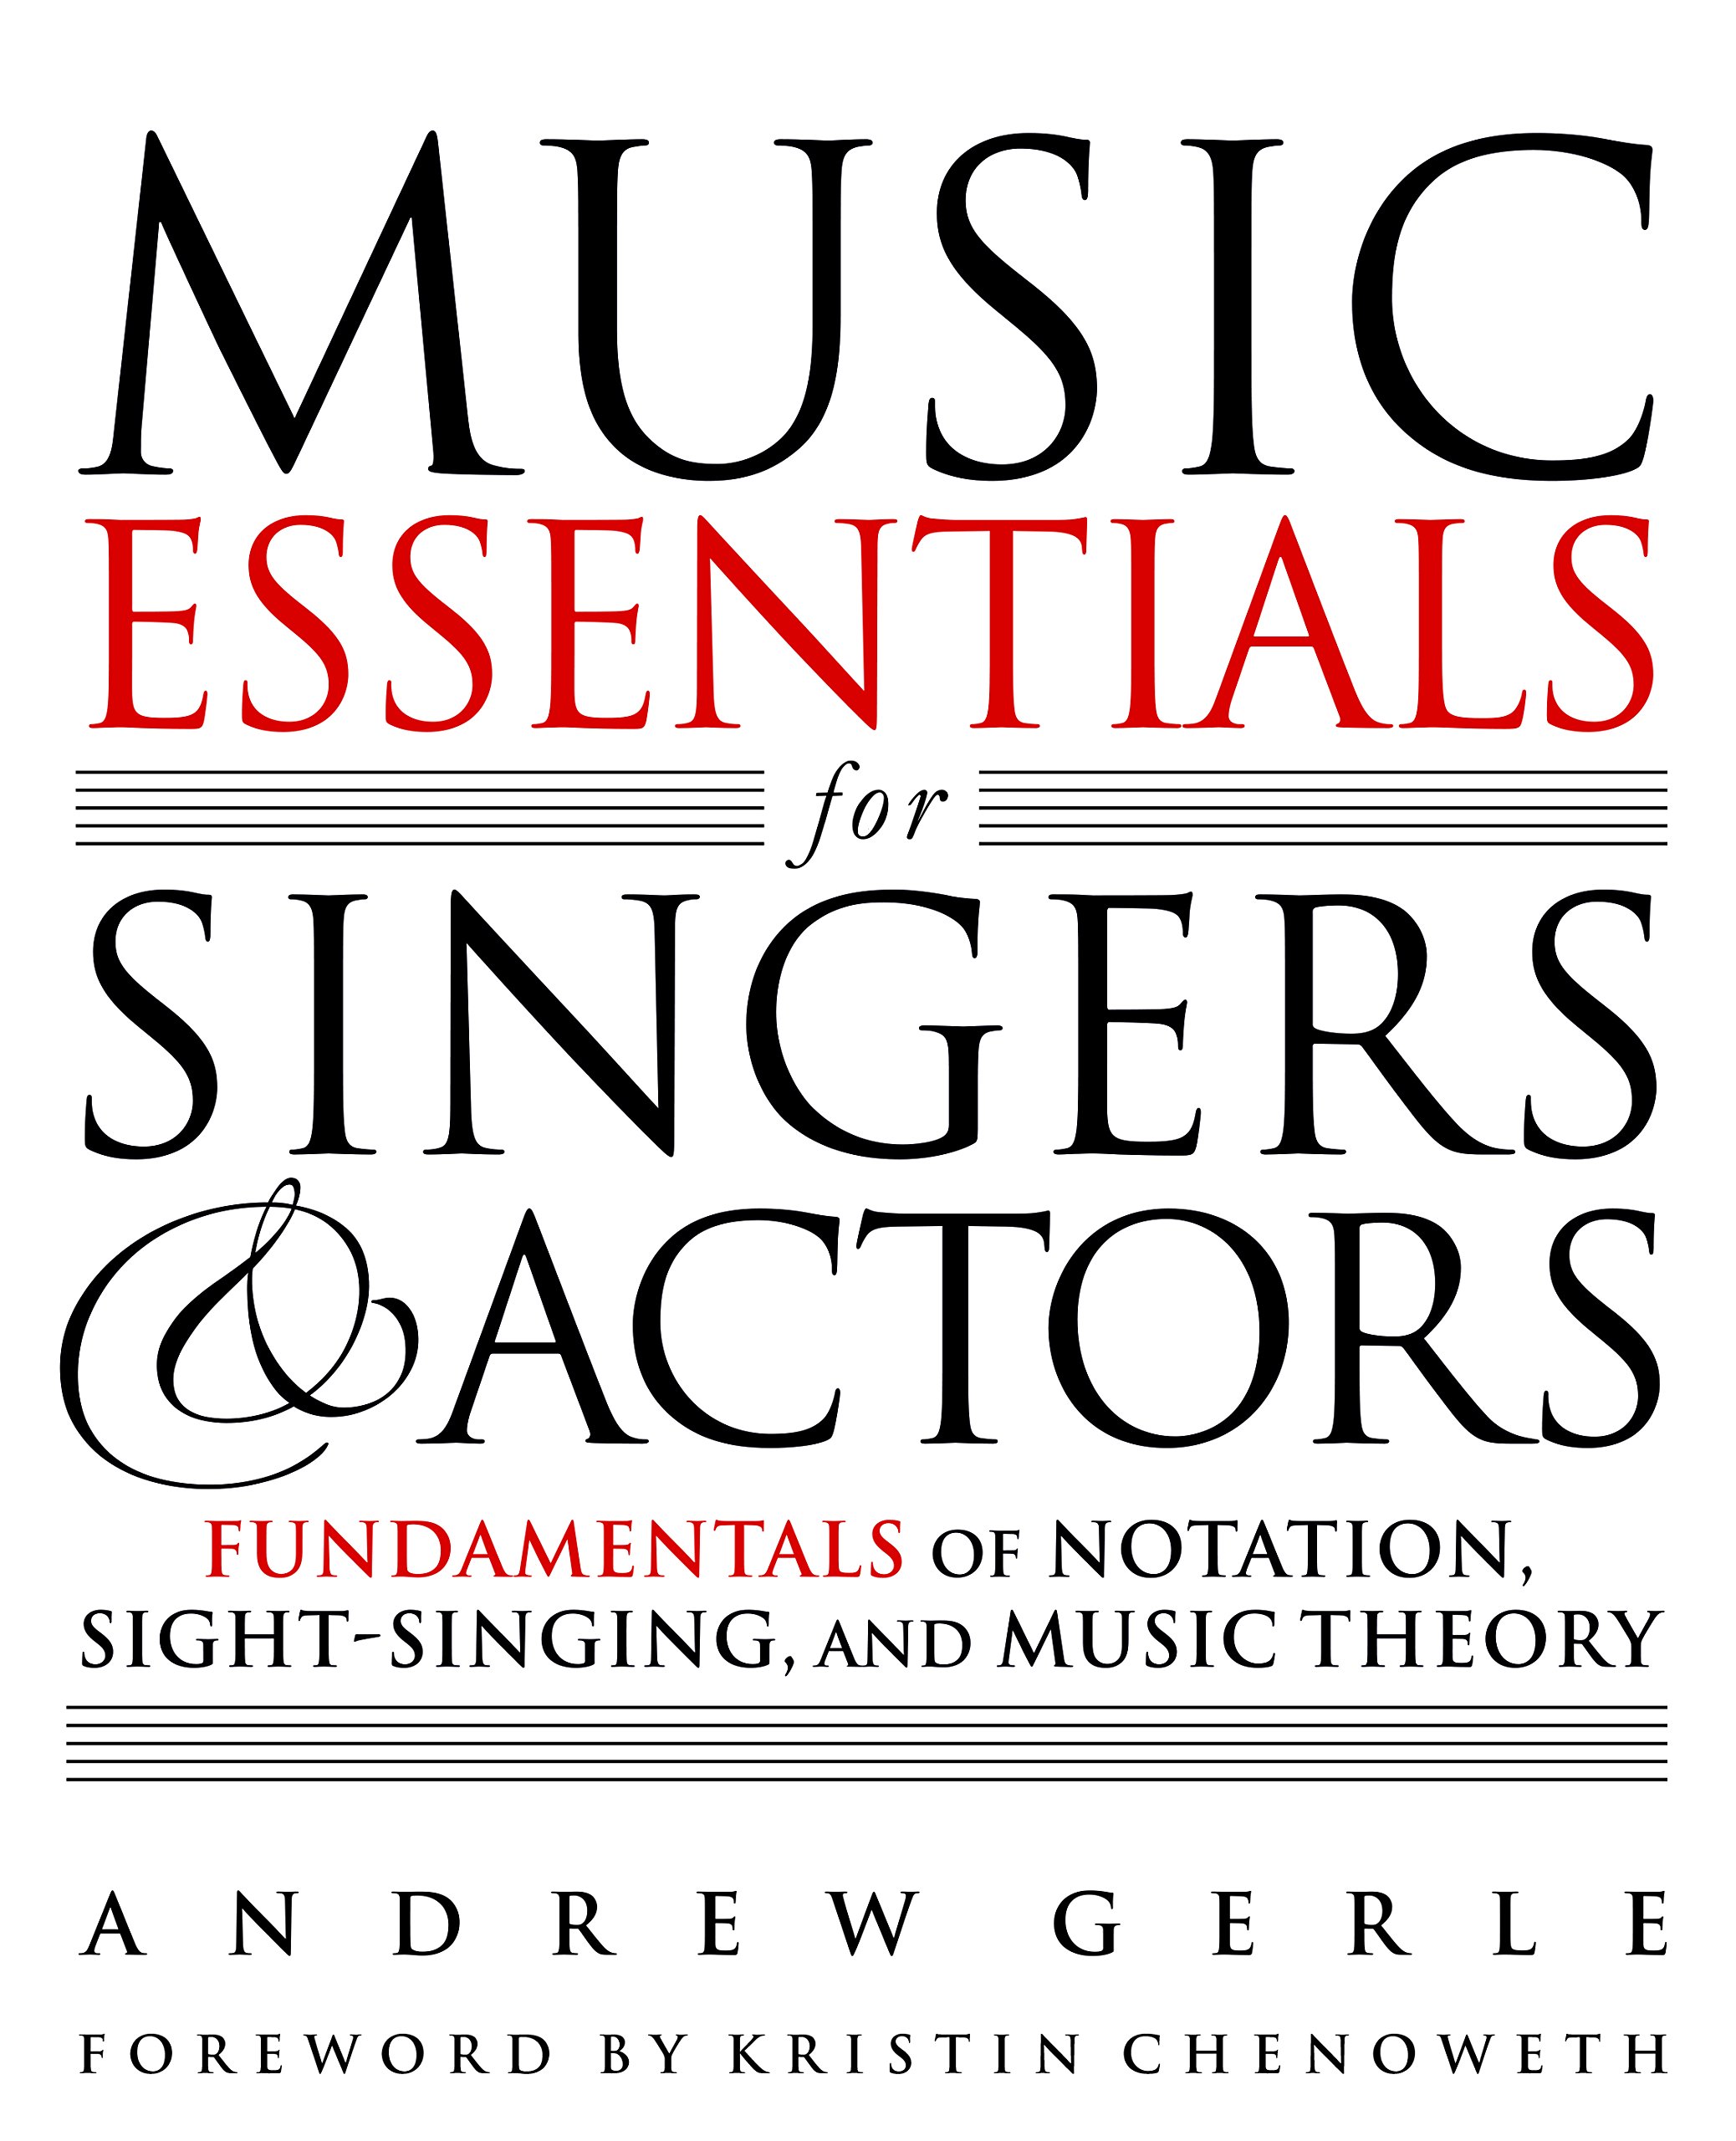 Music Essentials for Singers and Actors: Fundamentals of Notation, Sight-Singing, and Music Theory